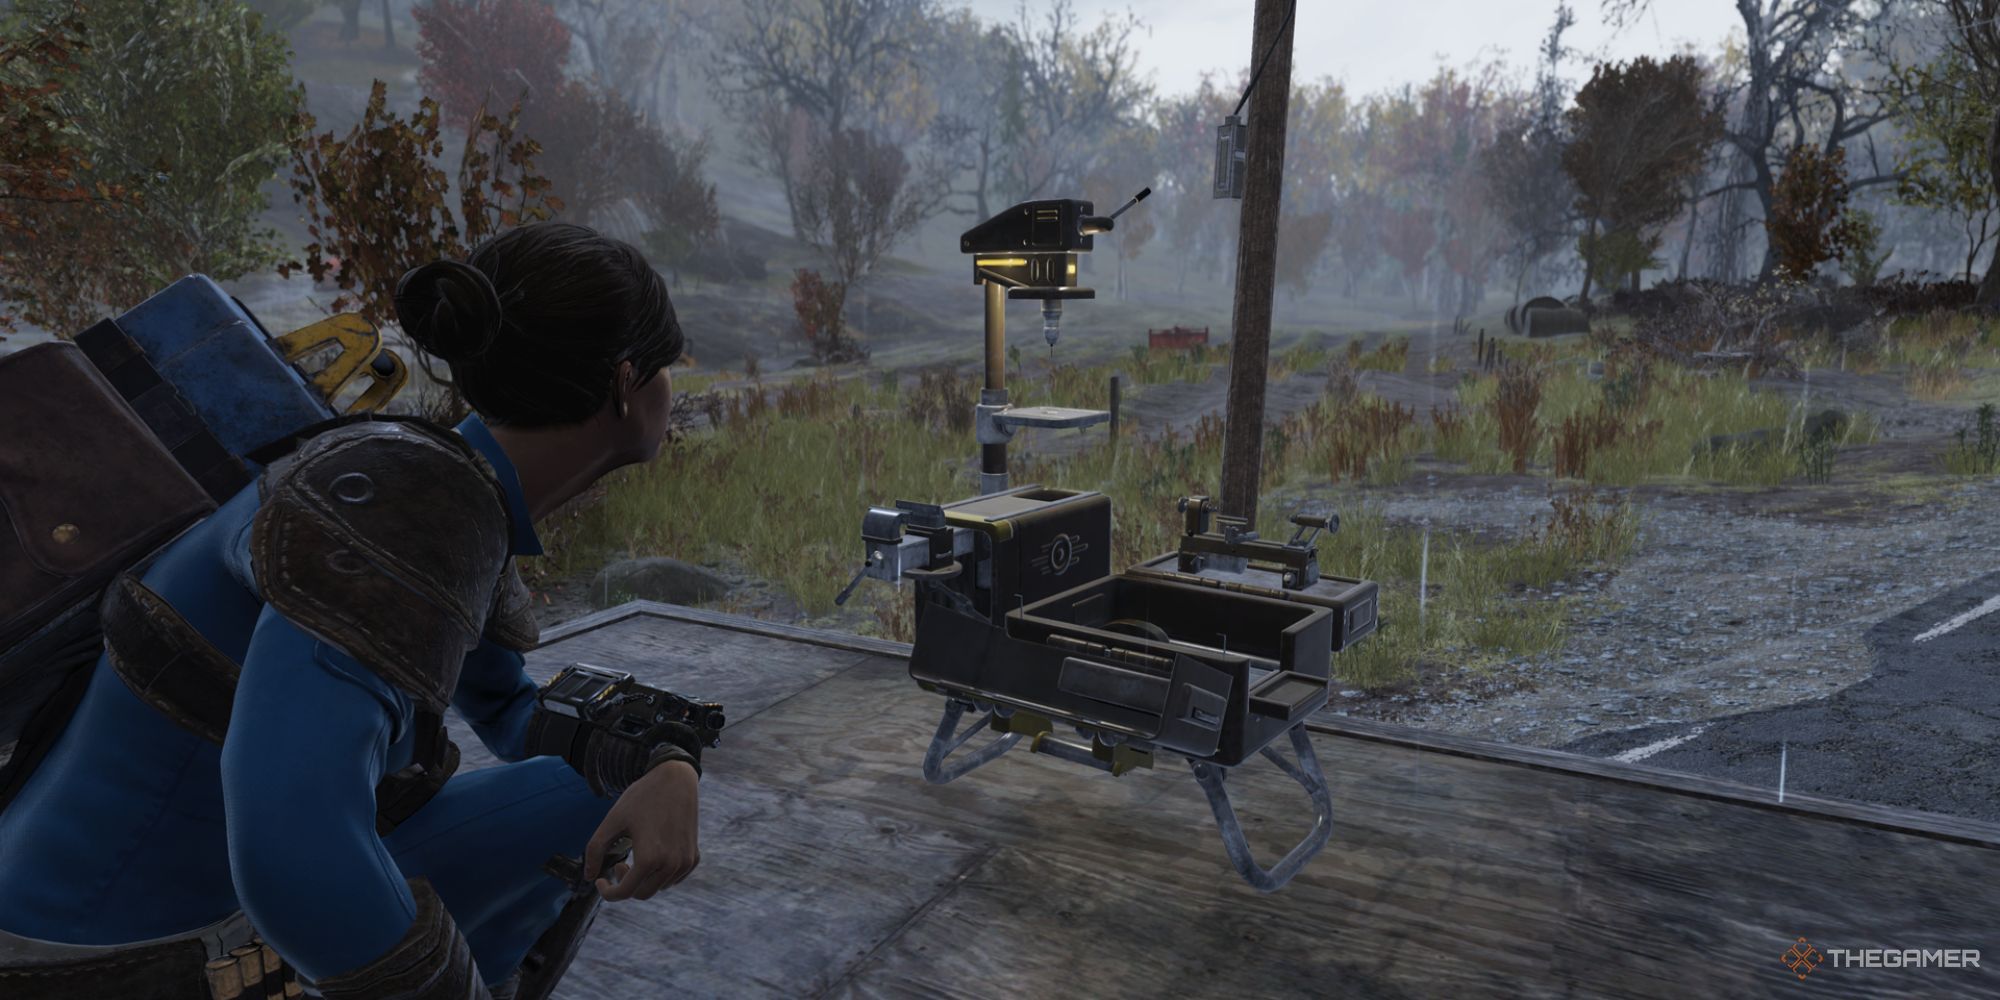 A player crouching near a CAMP device on the outskirts of Wixon Homestead in Fallout 76.